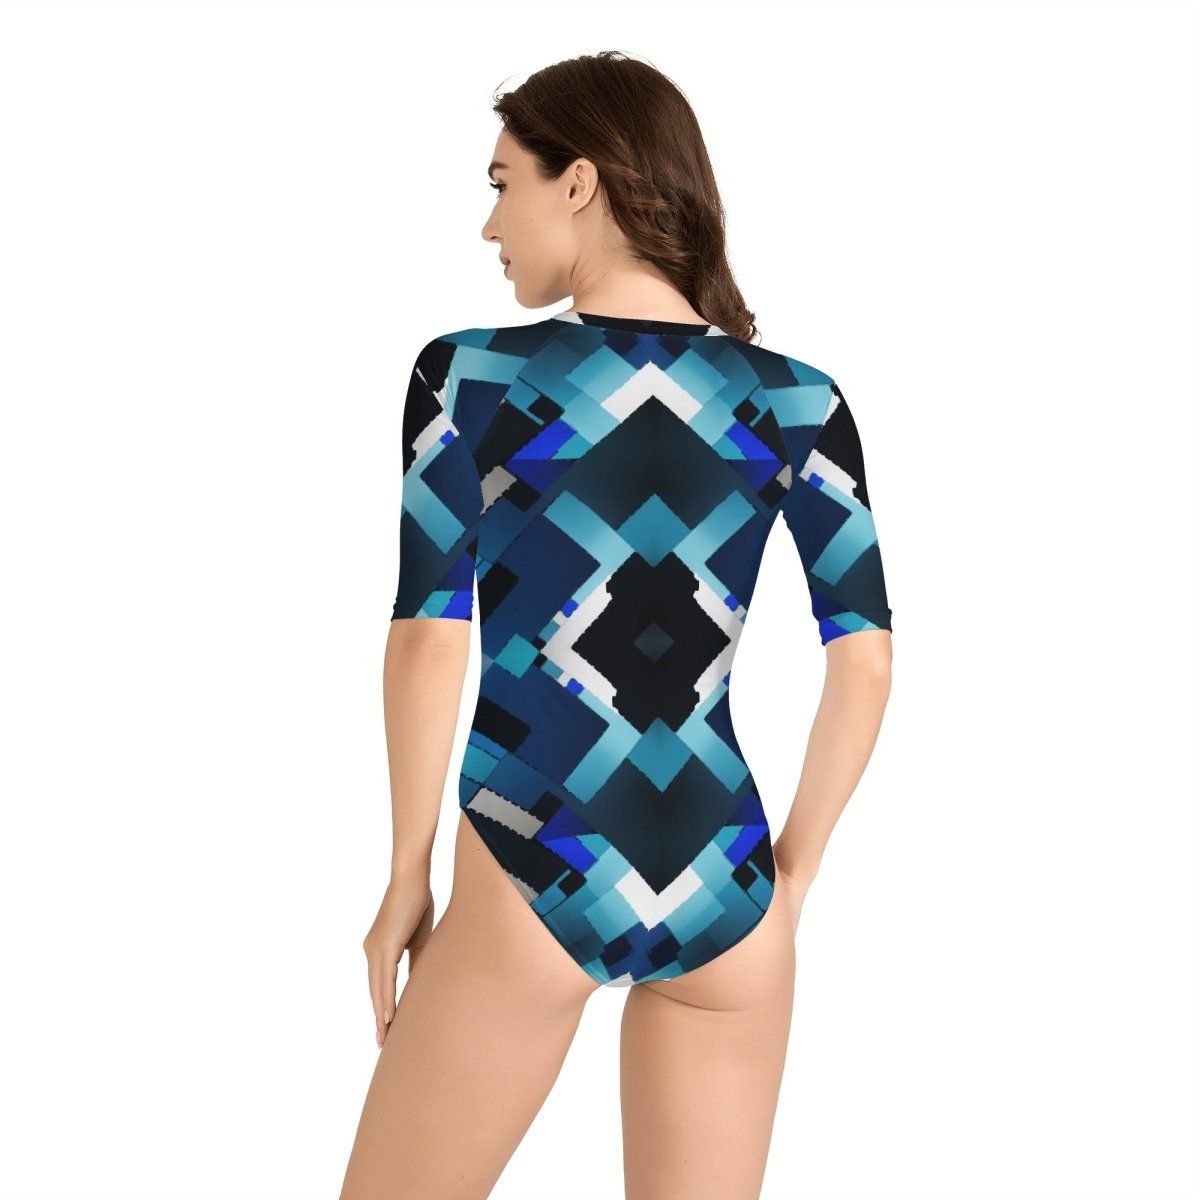 Black and Blue Womens Half Sleeve Zip Front One Piece Swimsuit - Perfect for Active Days at the Beach - Iron Phoenix GHG